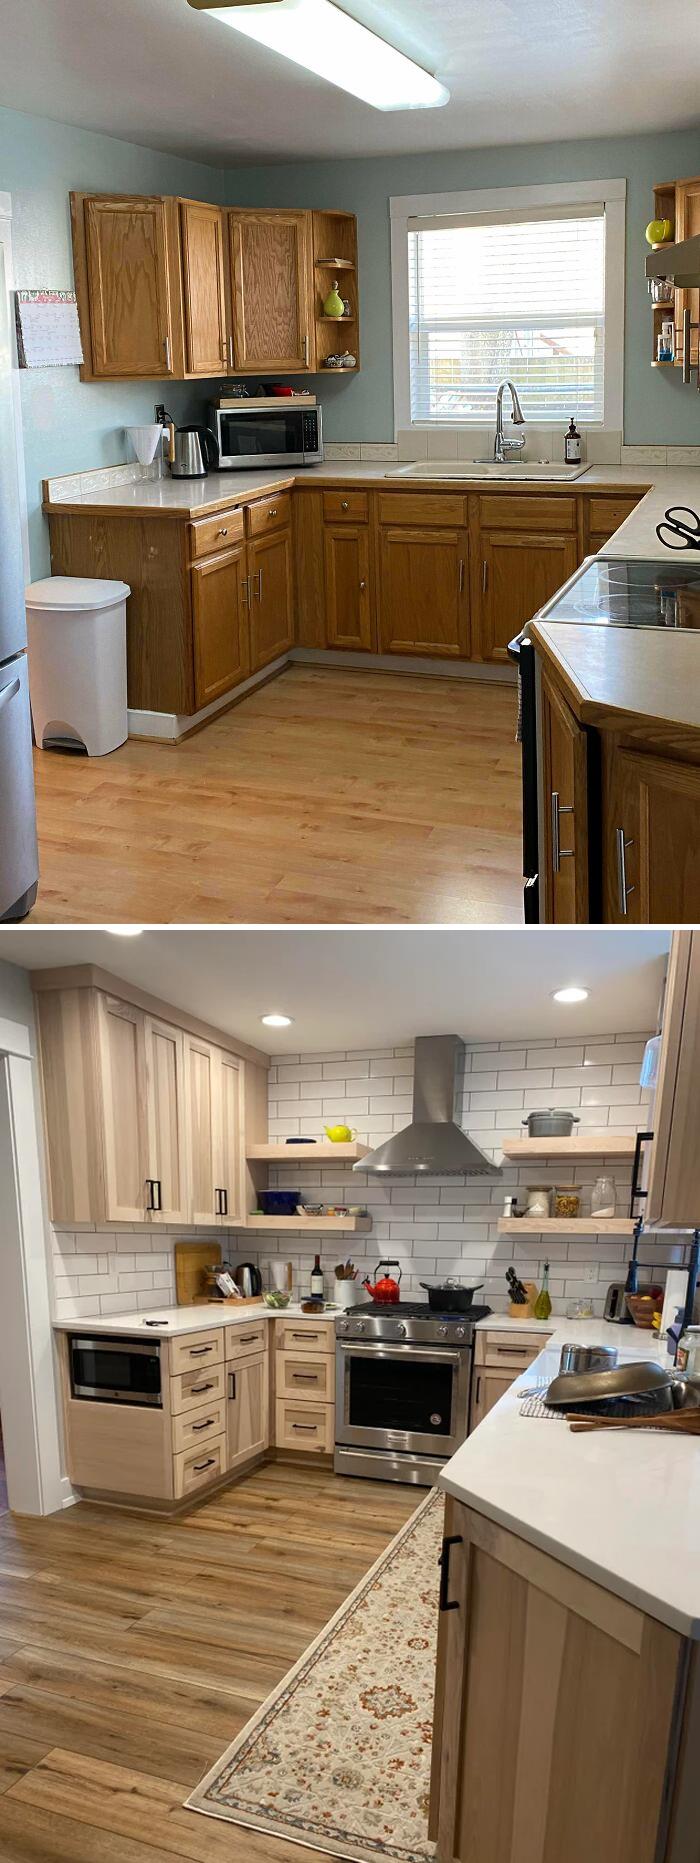 Our Kitchen Remodel Is Finally Done!